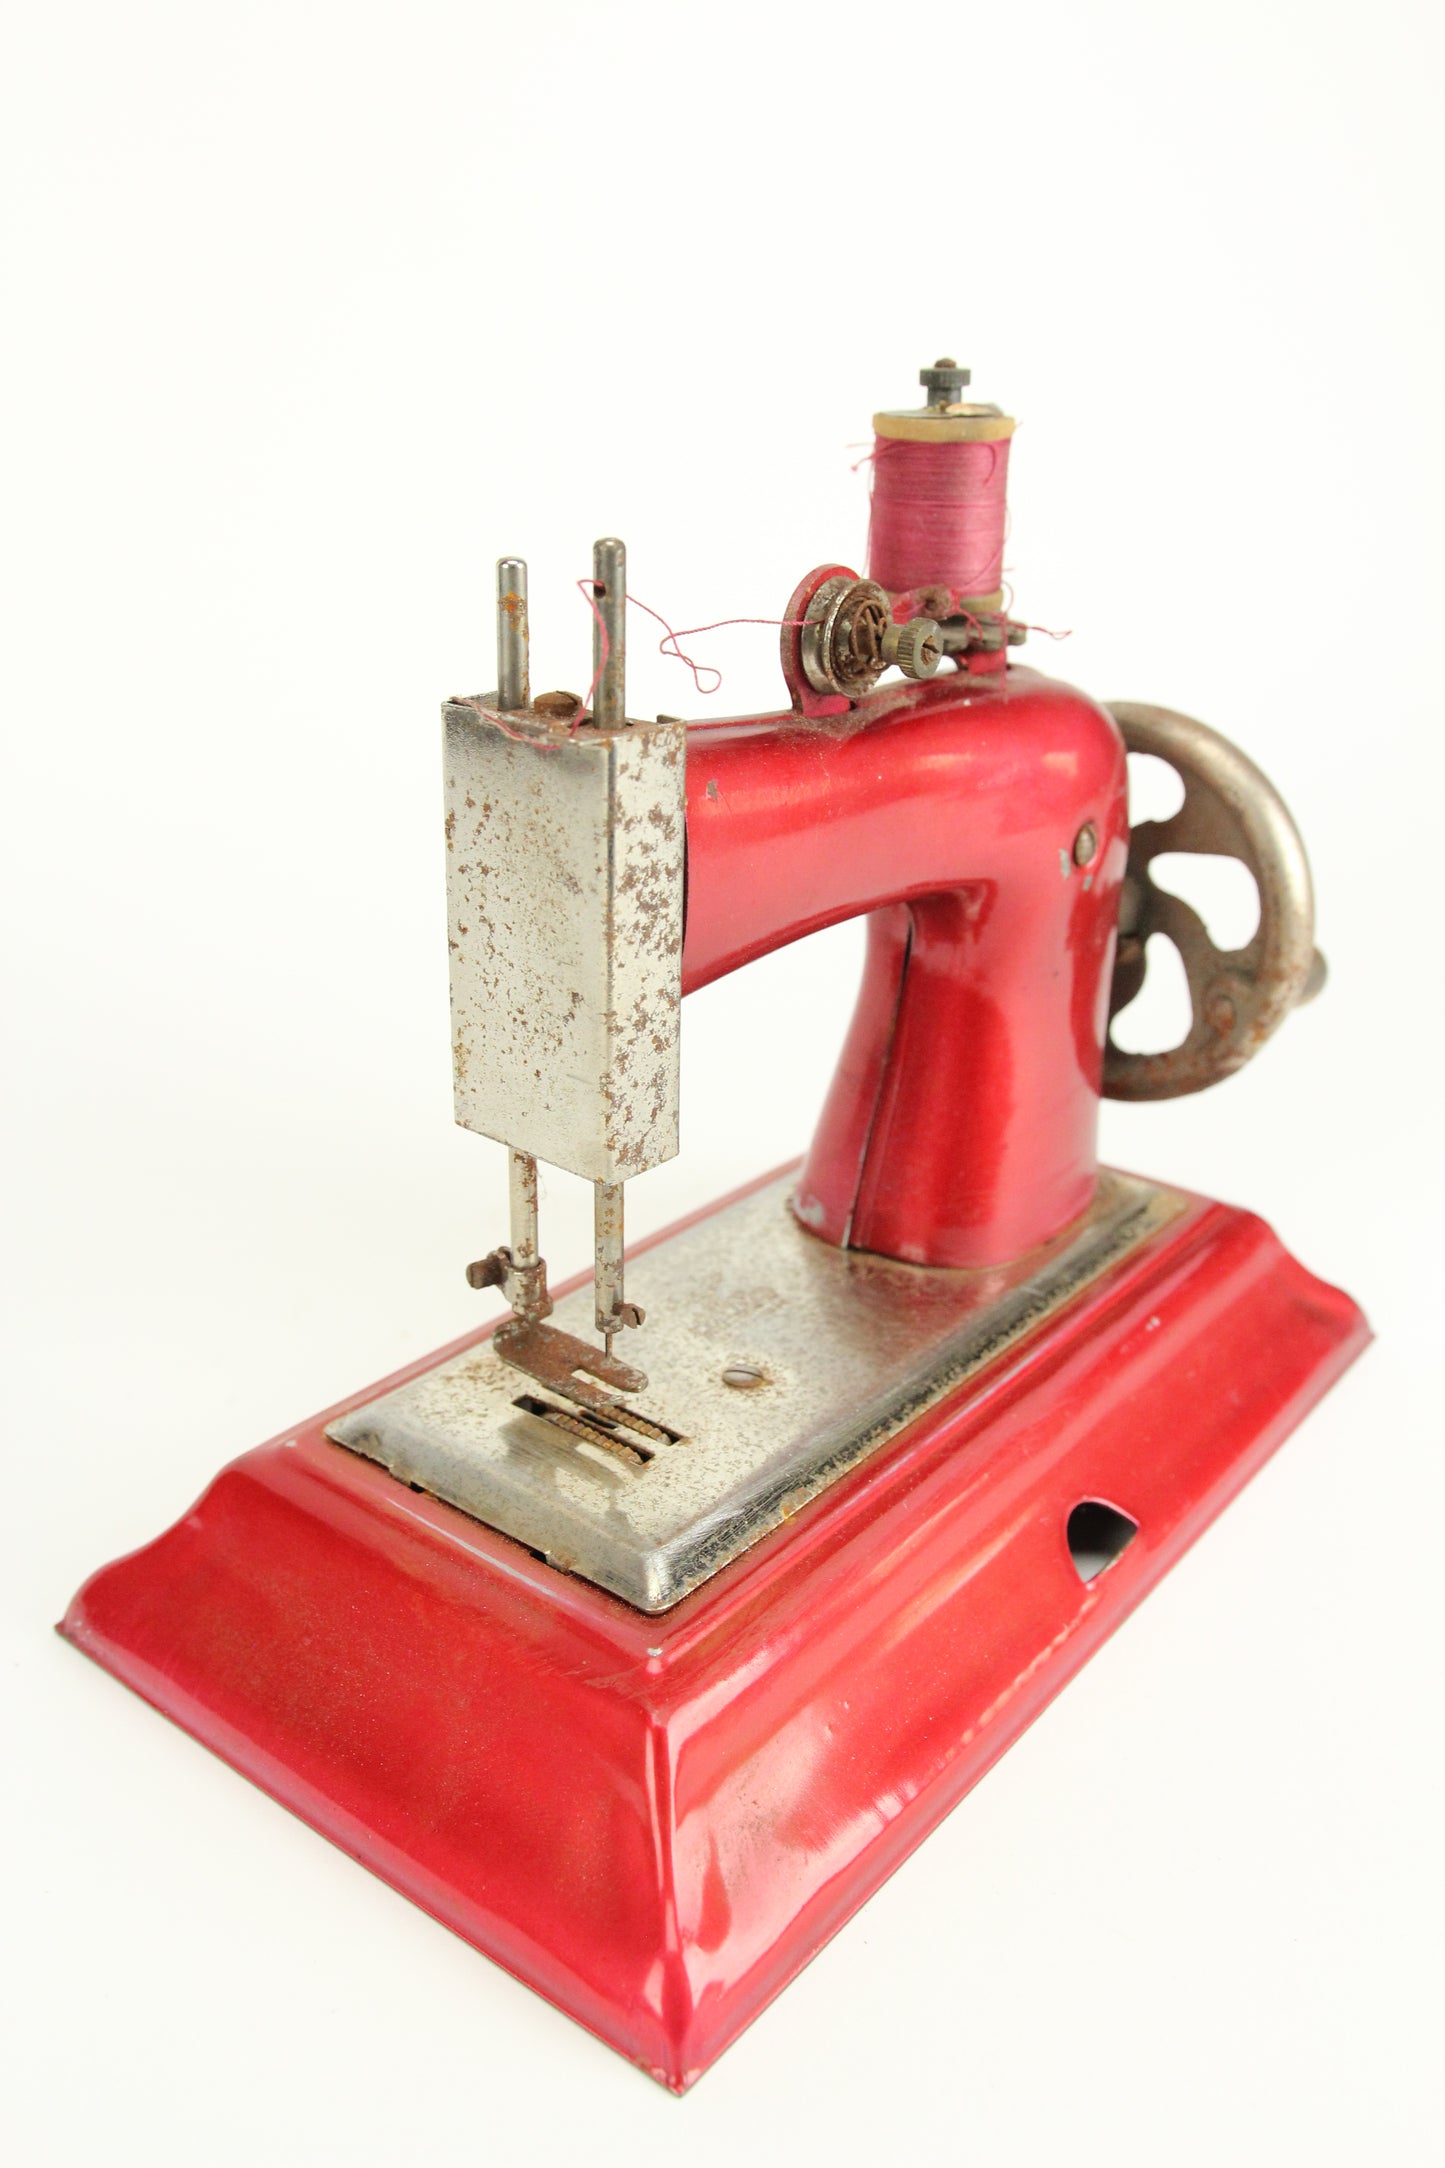 1940s Post-WWII Casige Red Tin Toy Sewing Machine, Made in Germany, British Zone